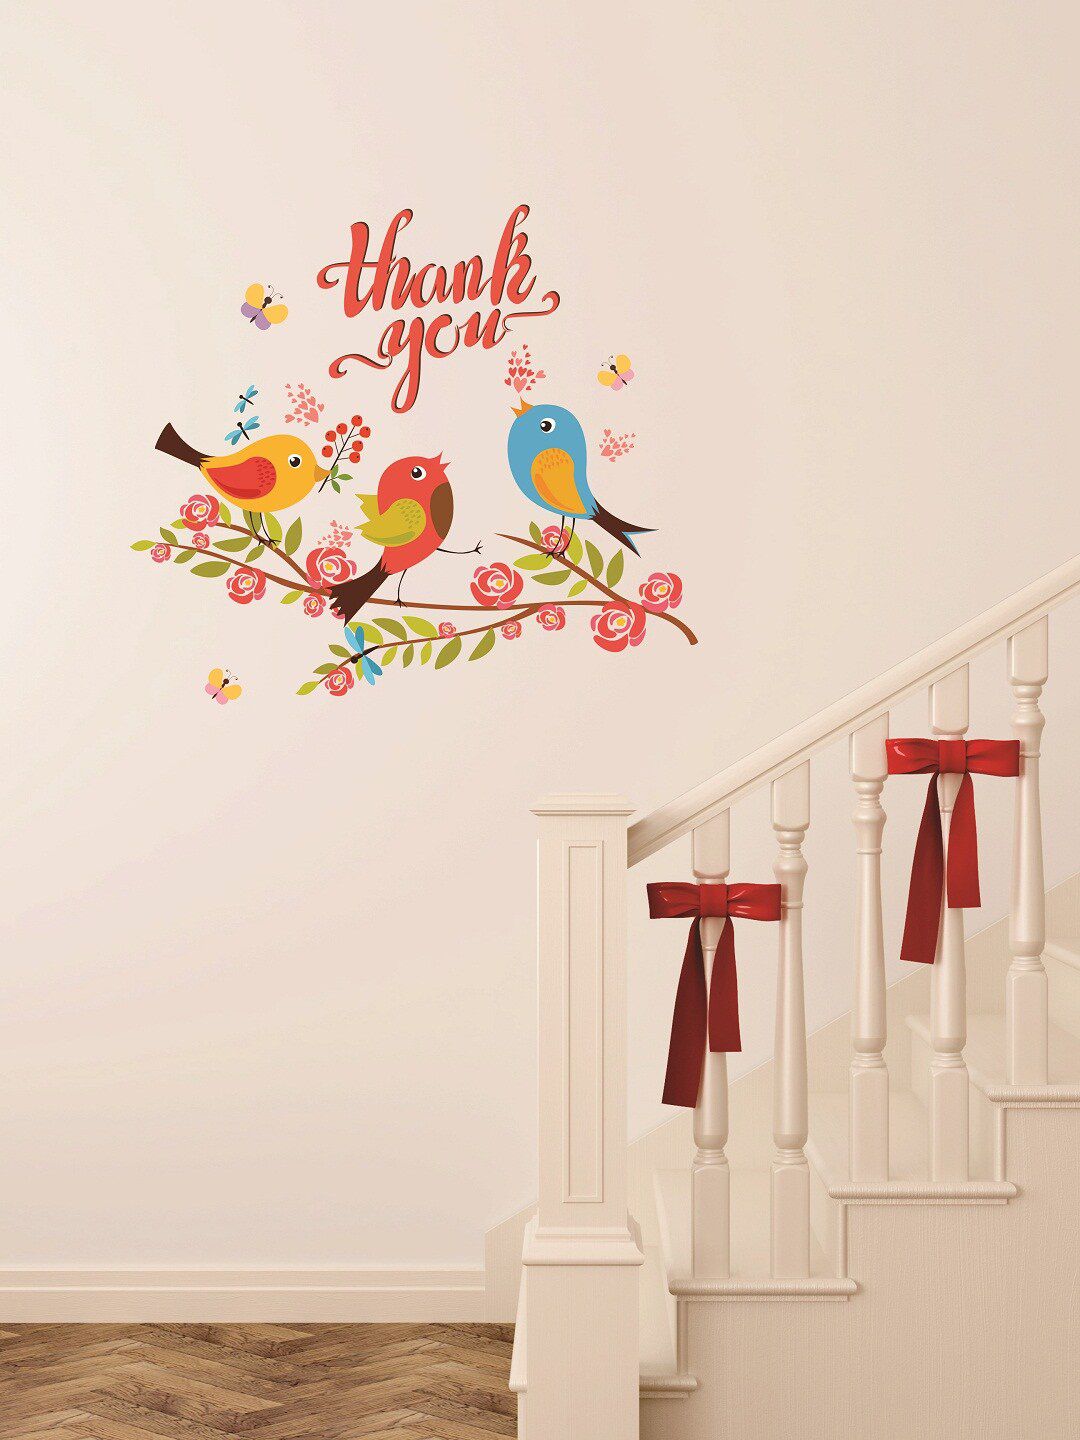 WALLSTICK Red & Yellow Thank You Large Vinyl Wall Sticker Price in India